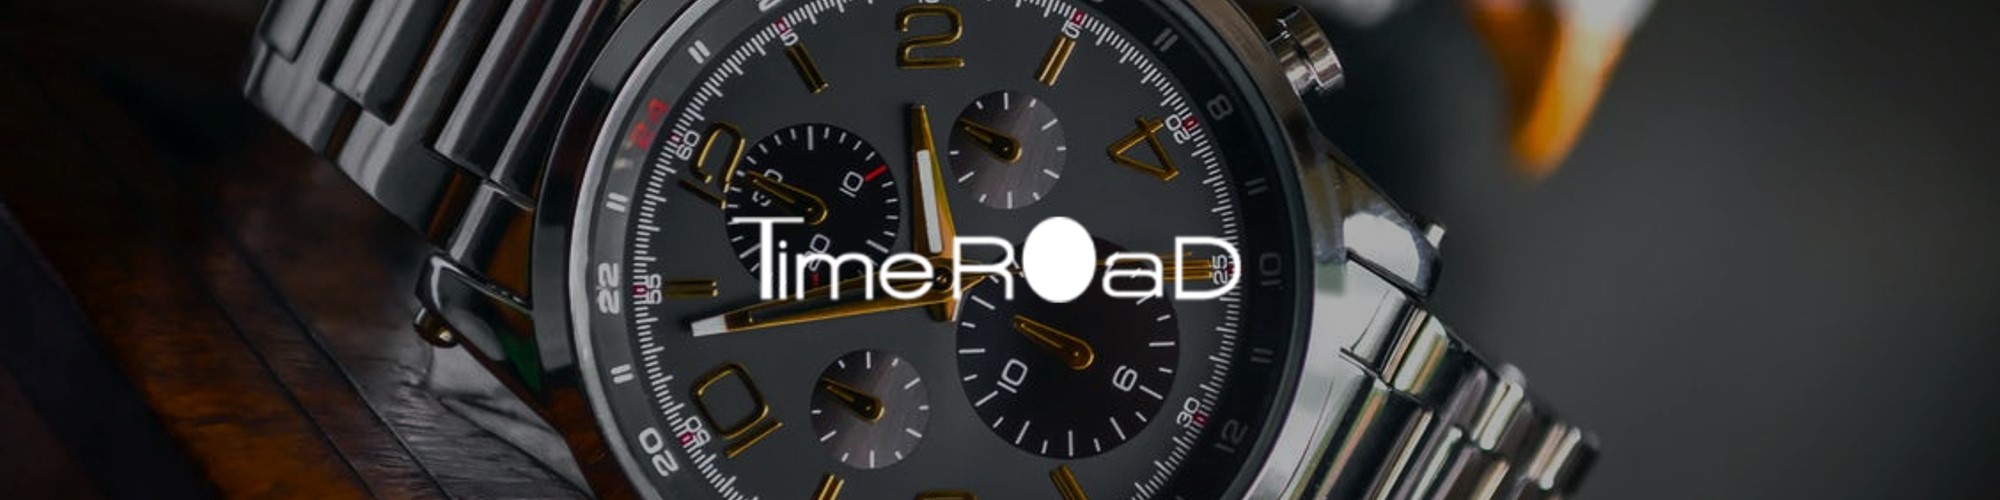 Time Road           